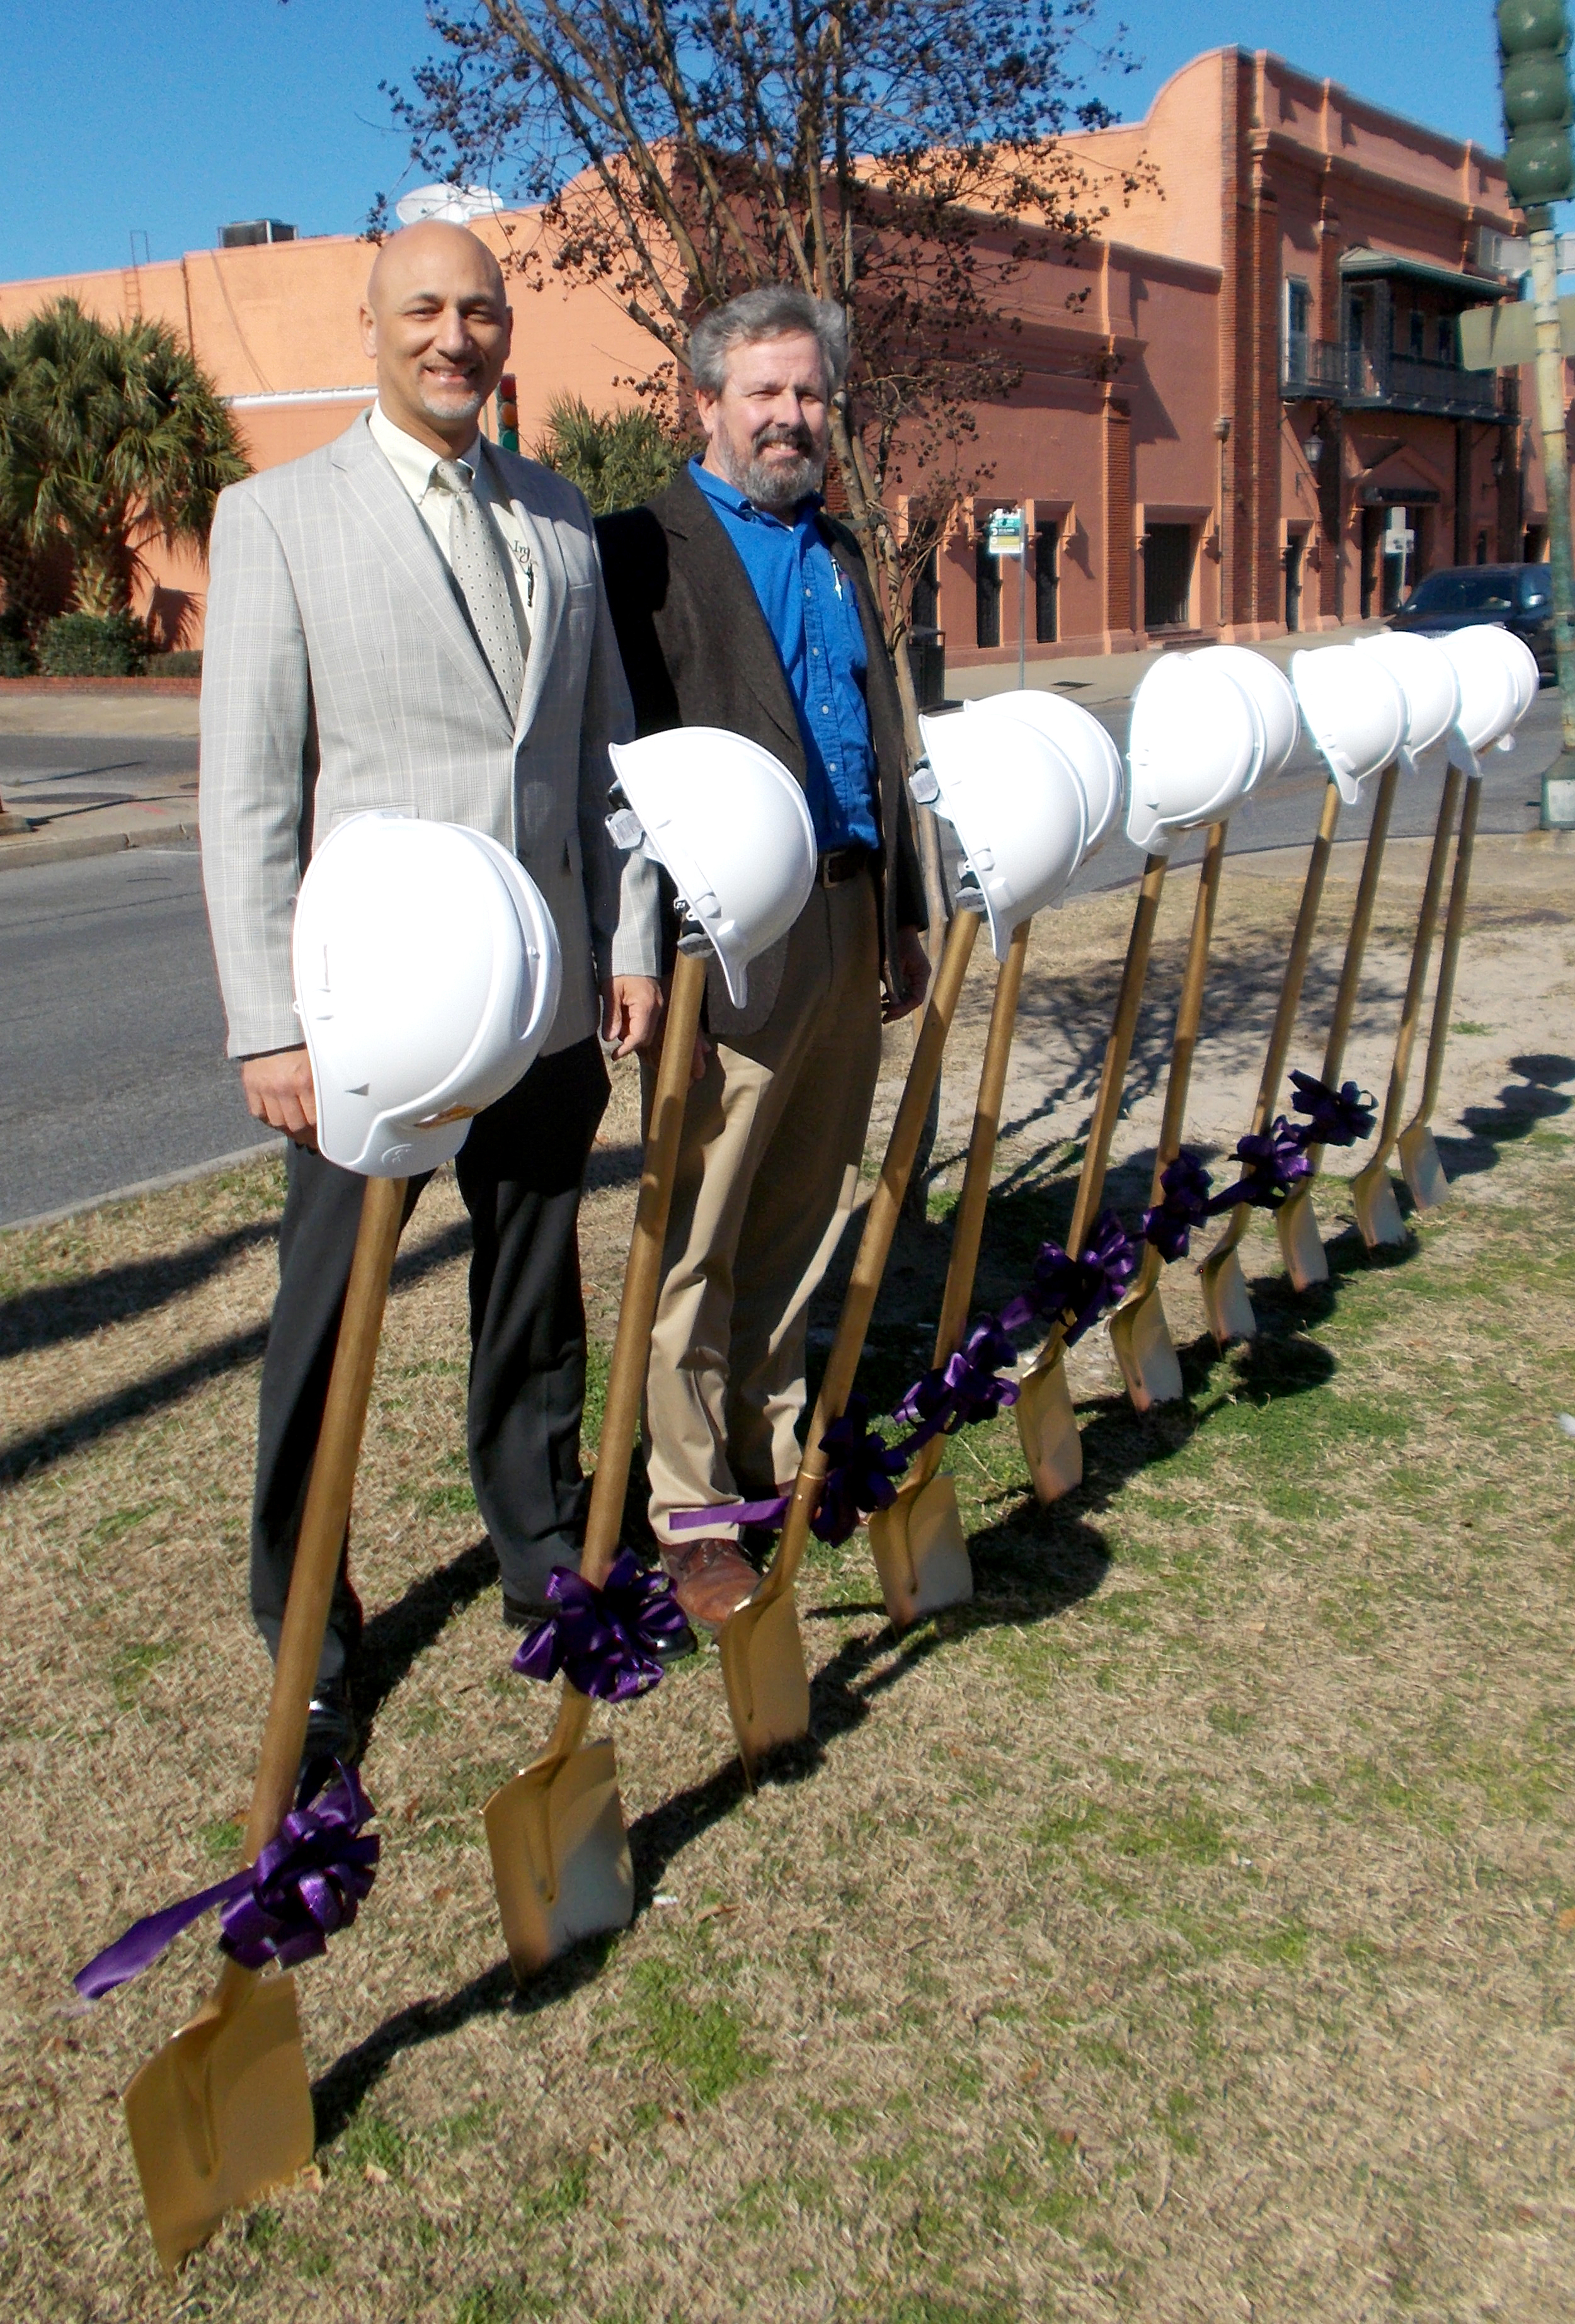  Infinity Engineering Consultants' Principal Raoul V. Chauvin, III, left, and Civil Engineer Michael Riviere stand before the ceremonial shovel at the Rampart Streetcar Line ground breaking ceremony on January 28, 2015.&nbsp; 